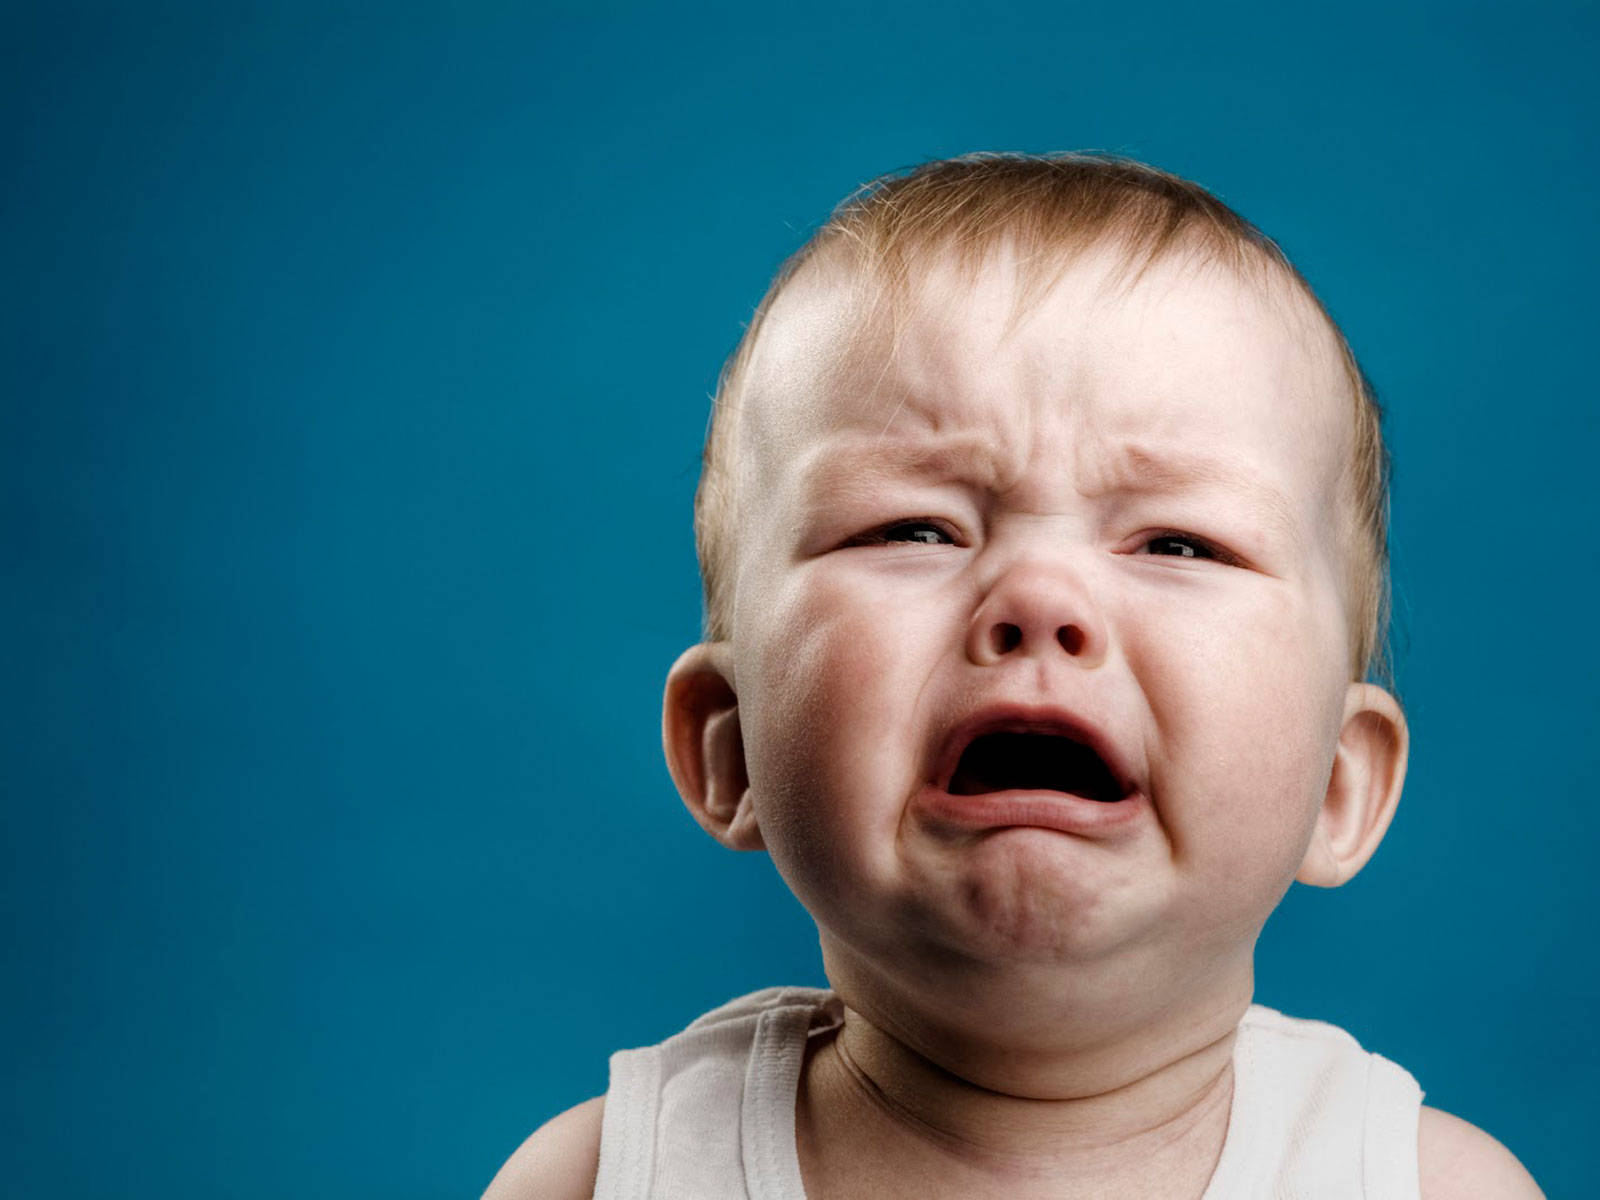 Funny Baby Crying Wallpaper